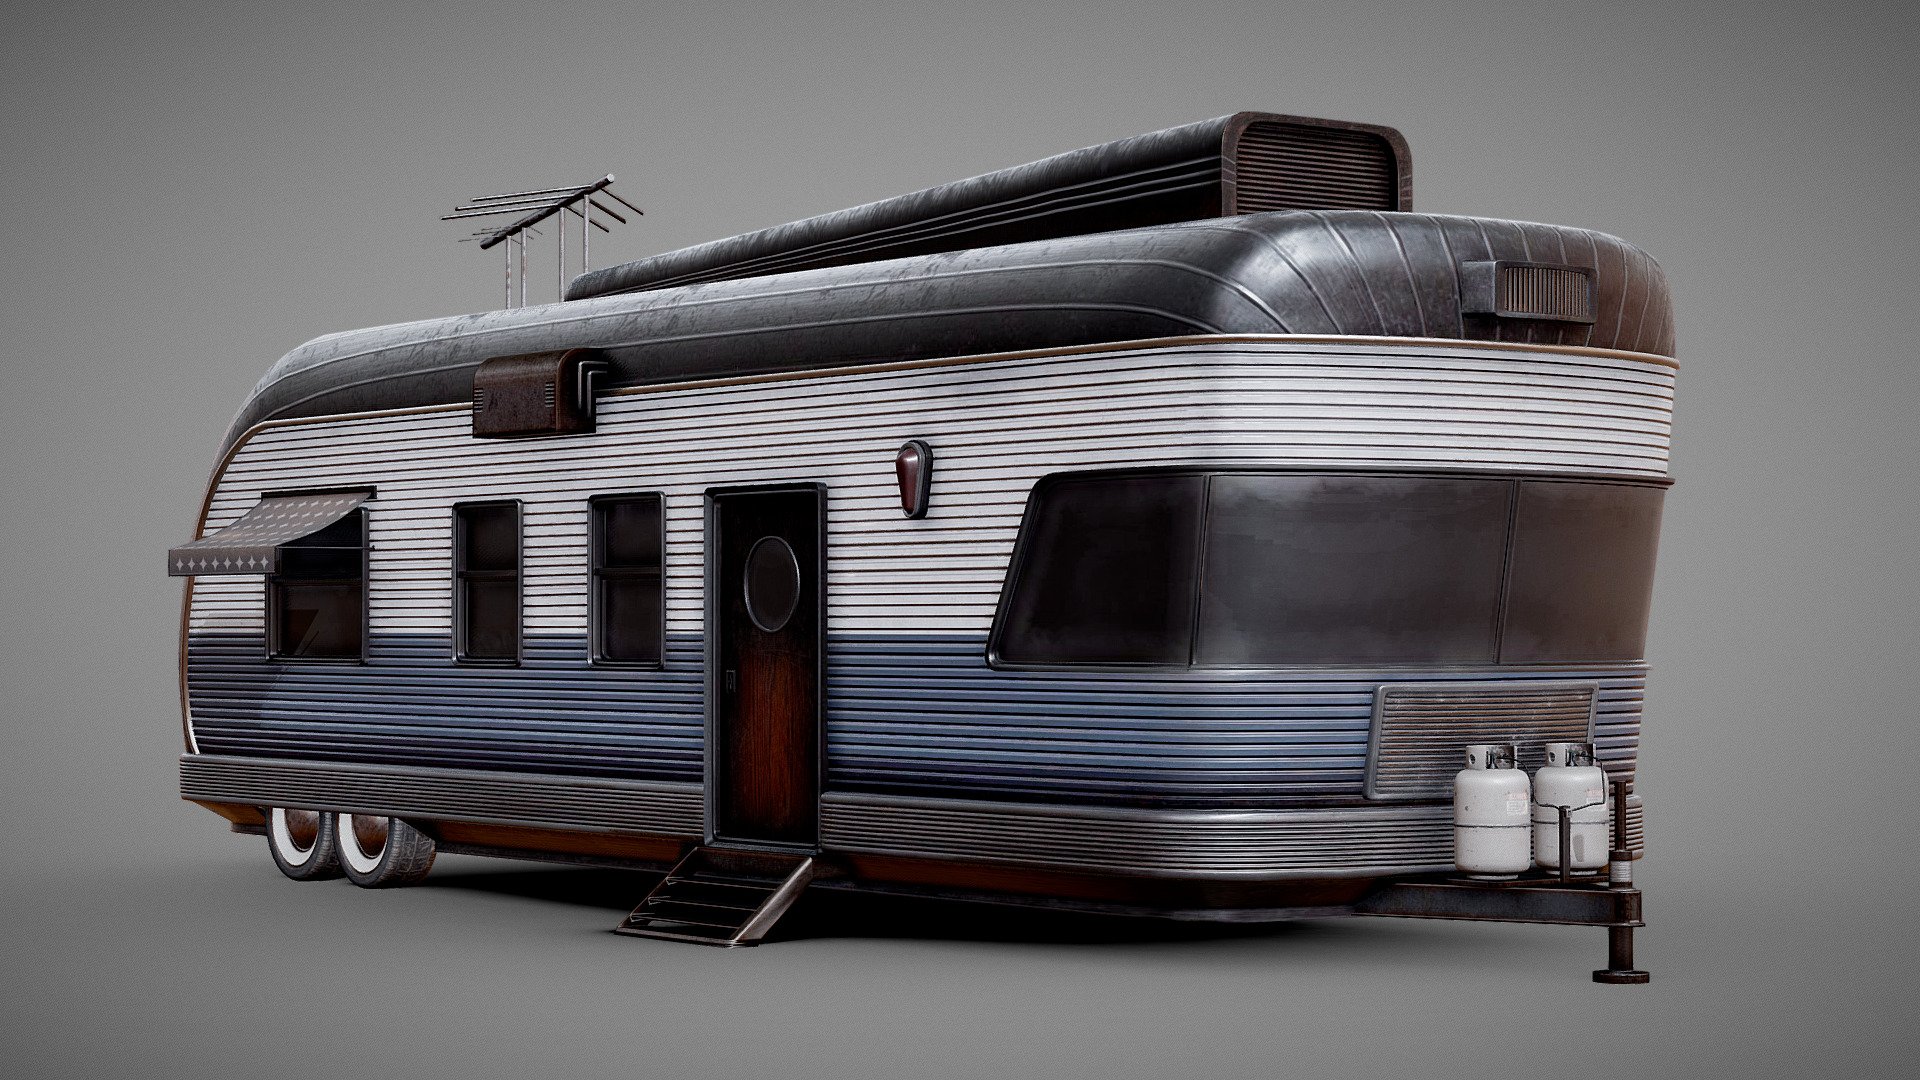 Here is a retro trailer home I made for practice. I was inspired by the old spartan trailers in the 1950s and wanted to create my own mixed with some of the other styles of trailers from that era.s

Low poly OBJ model

2k TGA textures - Retro Trailer - Buy Royalty Free 3D model by Tom Seddon (@bloodmeat08) 3d model